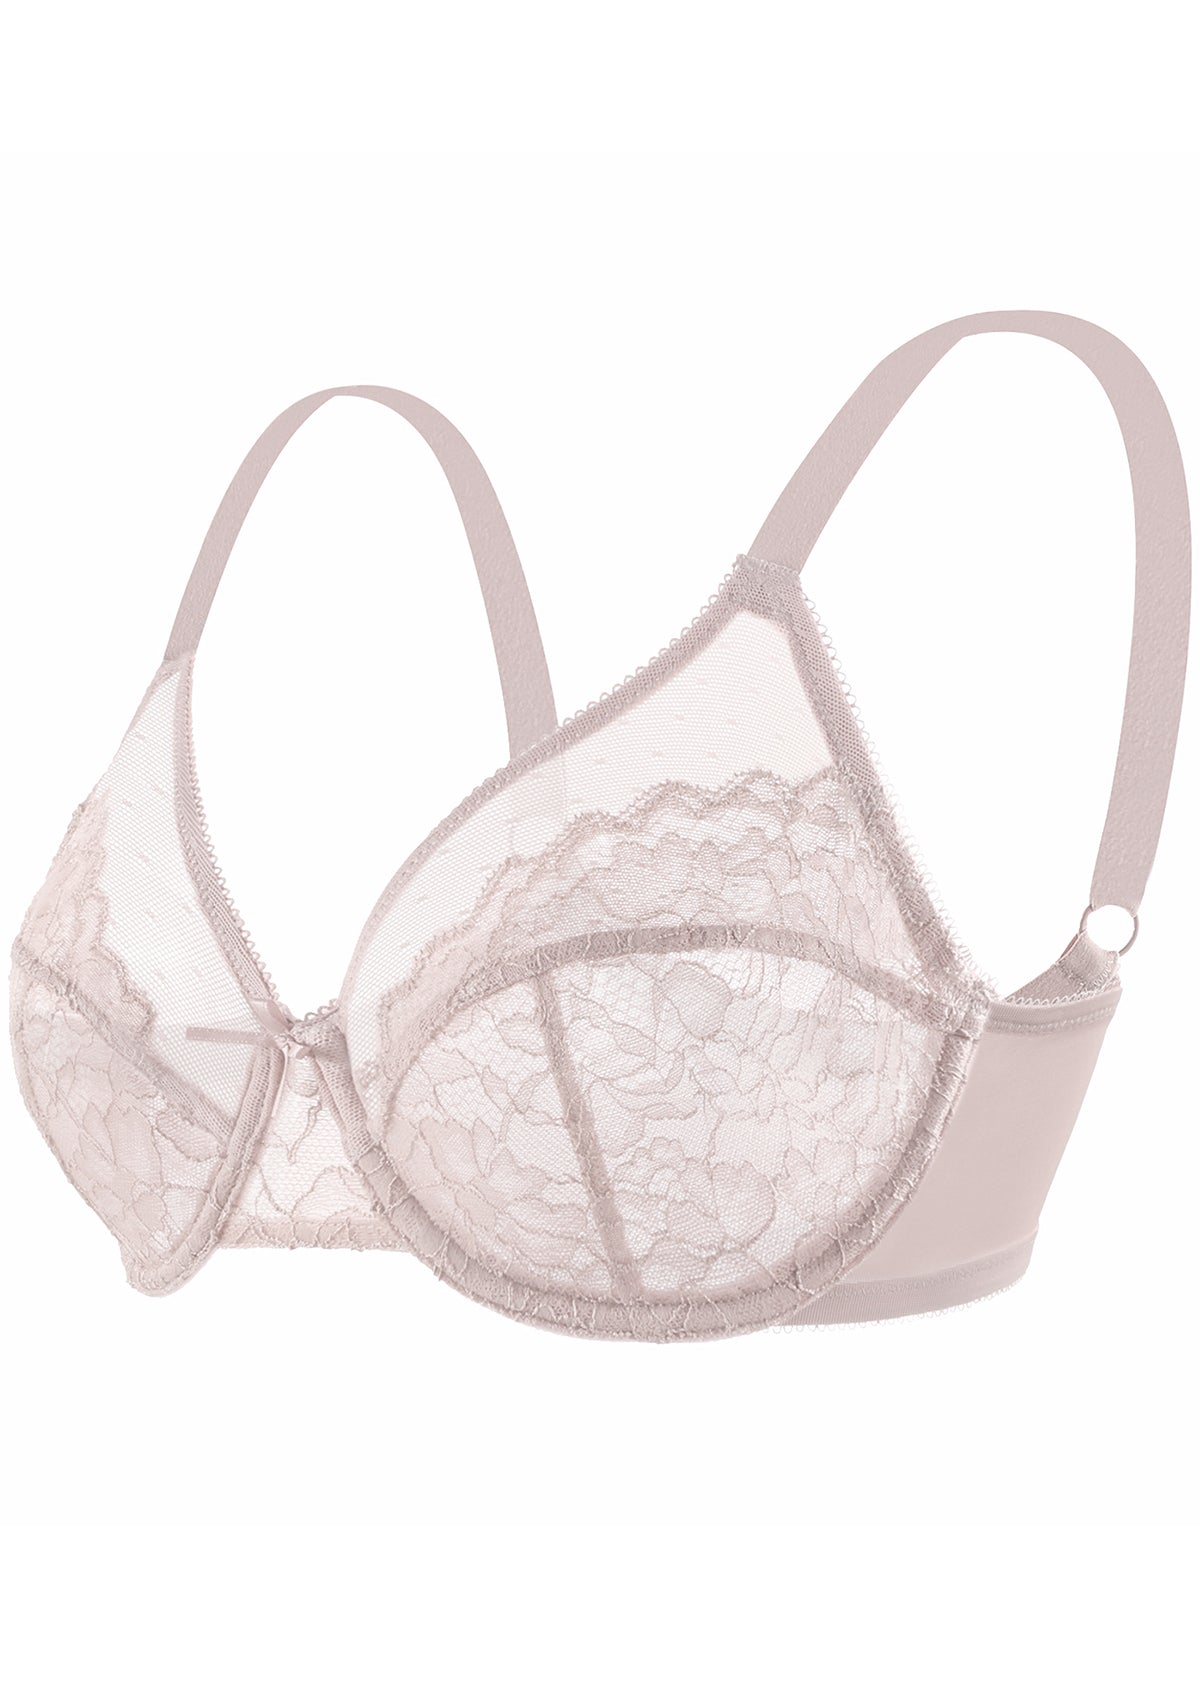 Demystifying Lined vs. Unlined Bras the Differences & Benefits